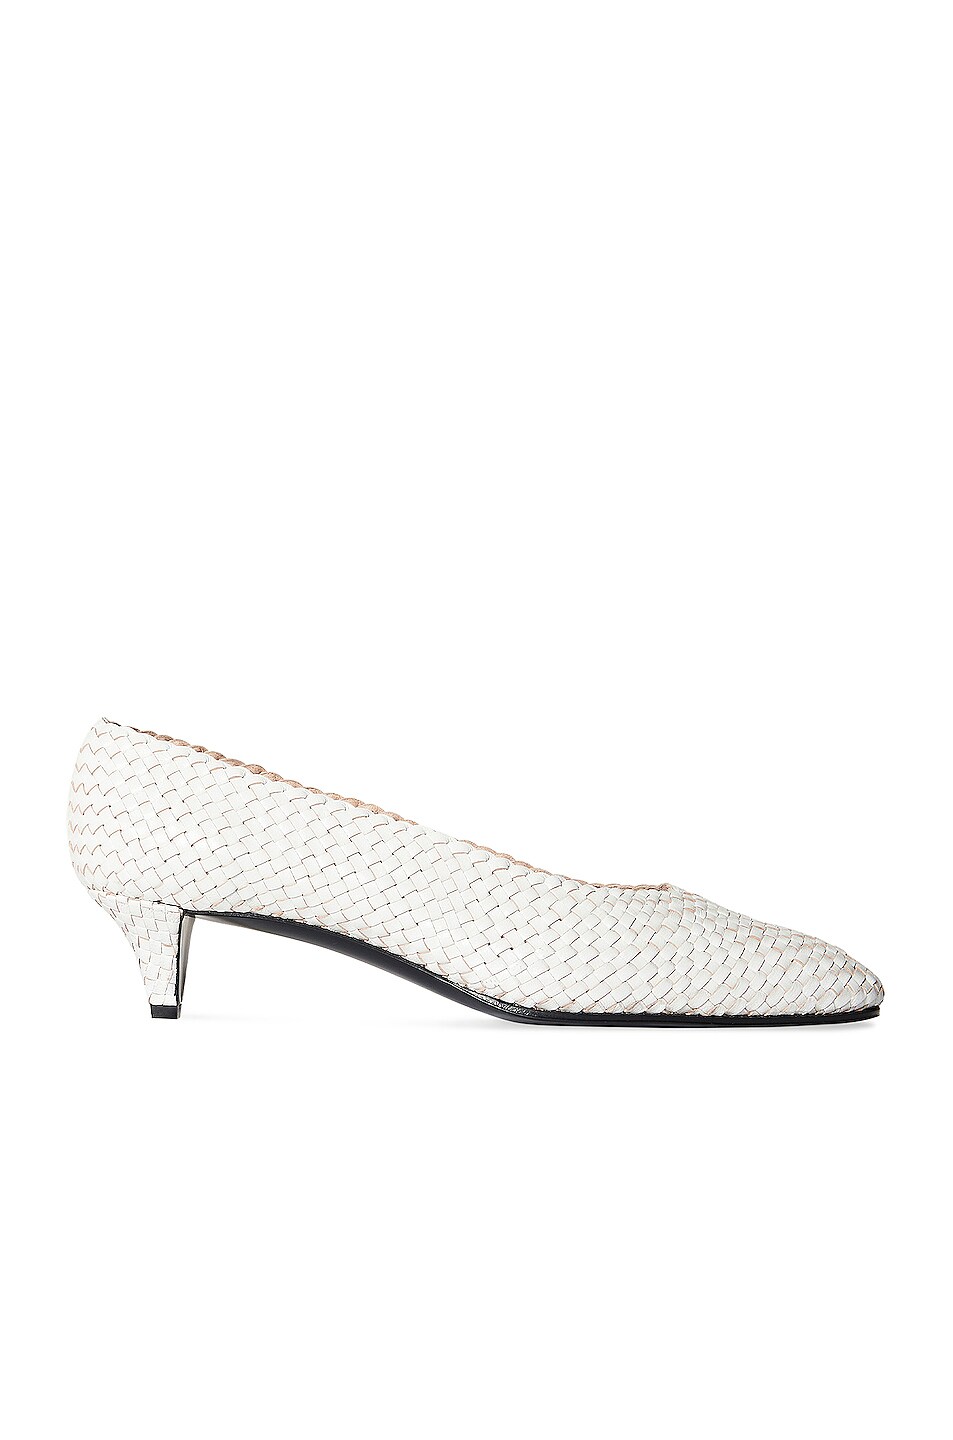 Image 1 of The Row Lady D Woven Leather Kitten Heels in Bianco